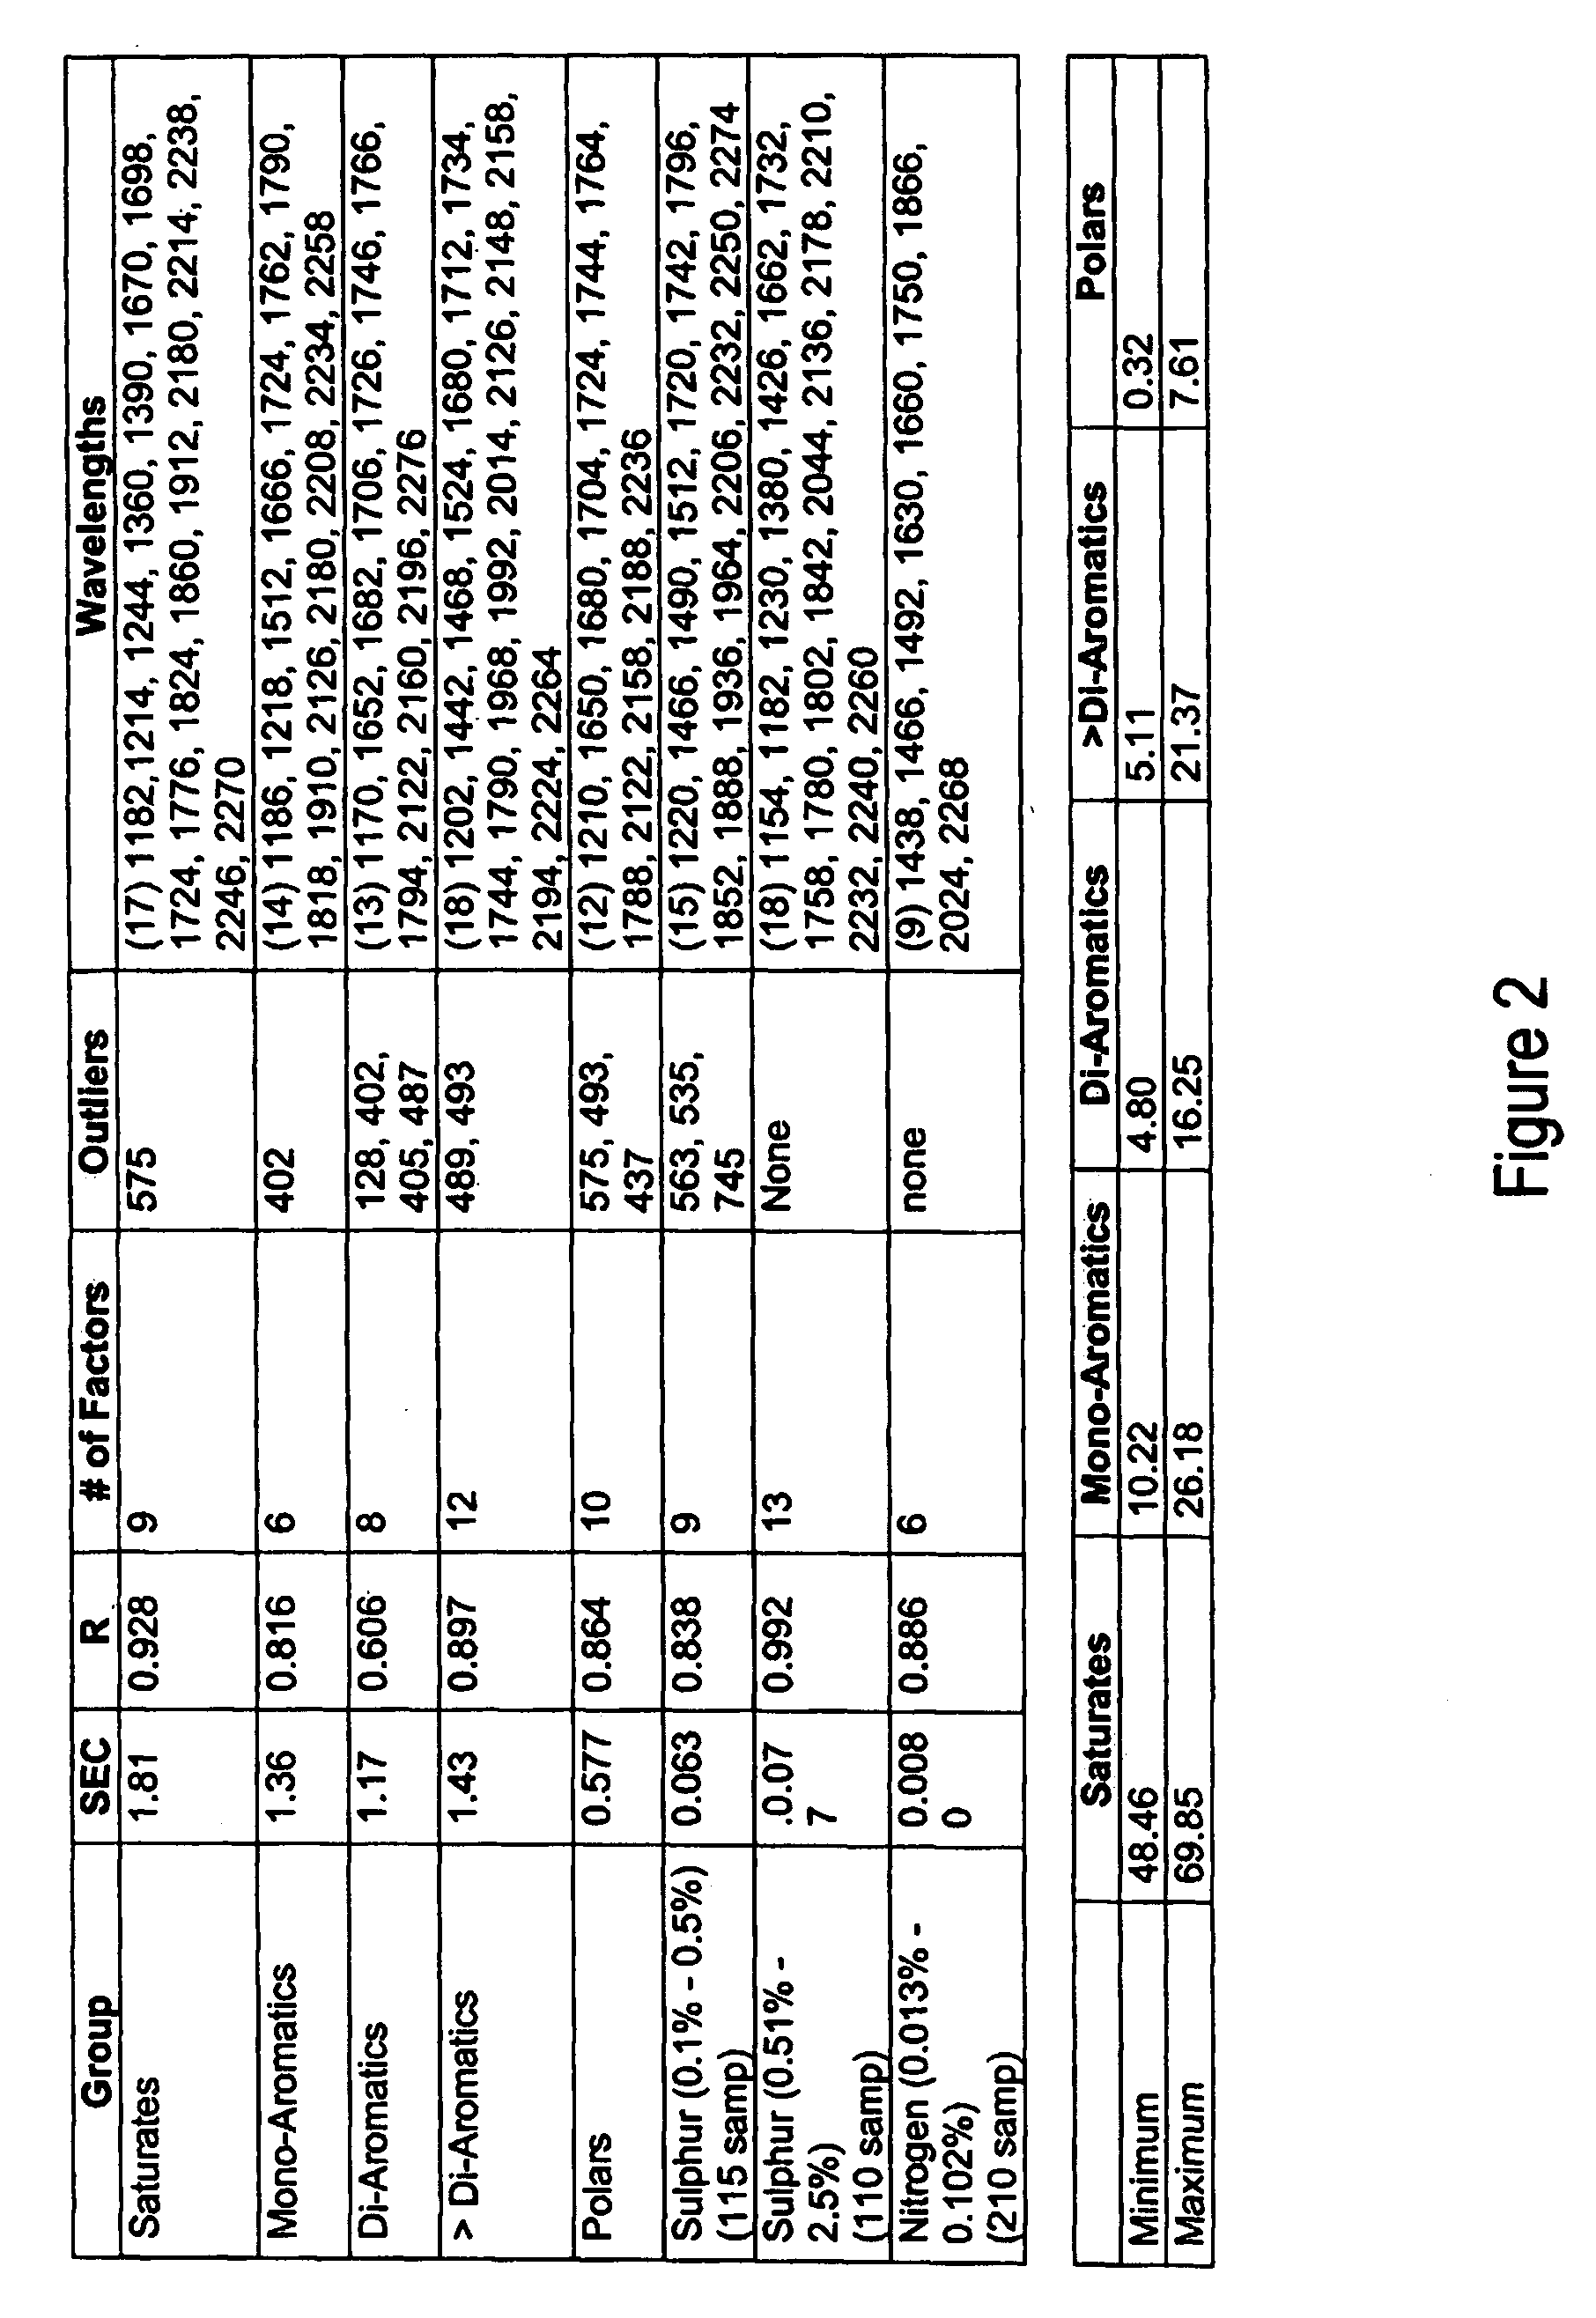 Method for monitoring feeds to catalytic cracking units by near-infrared spectroscopy